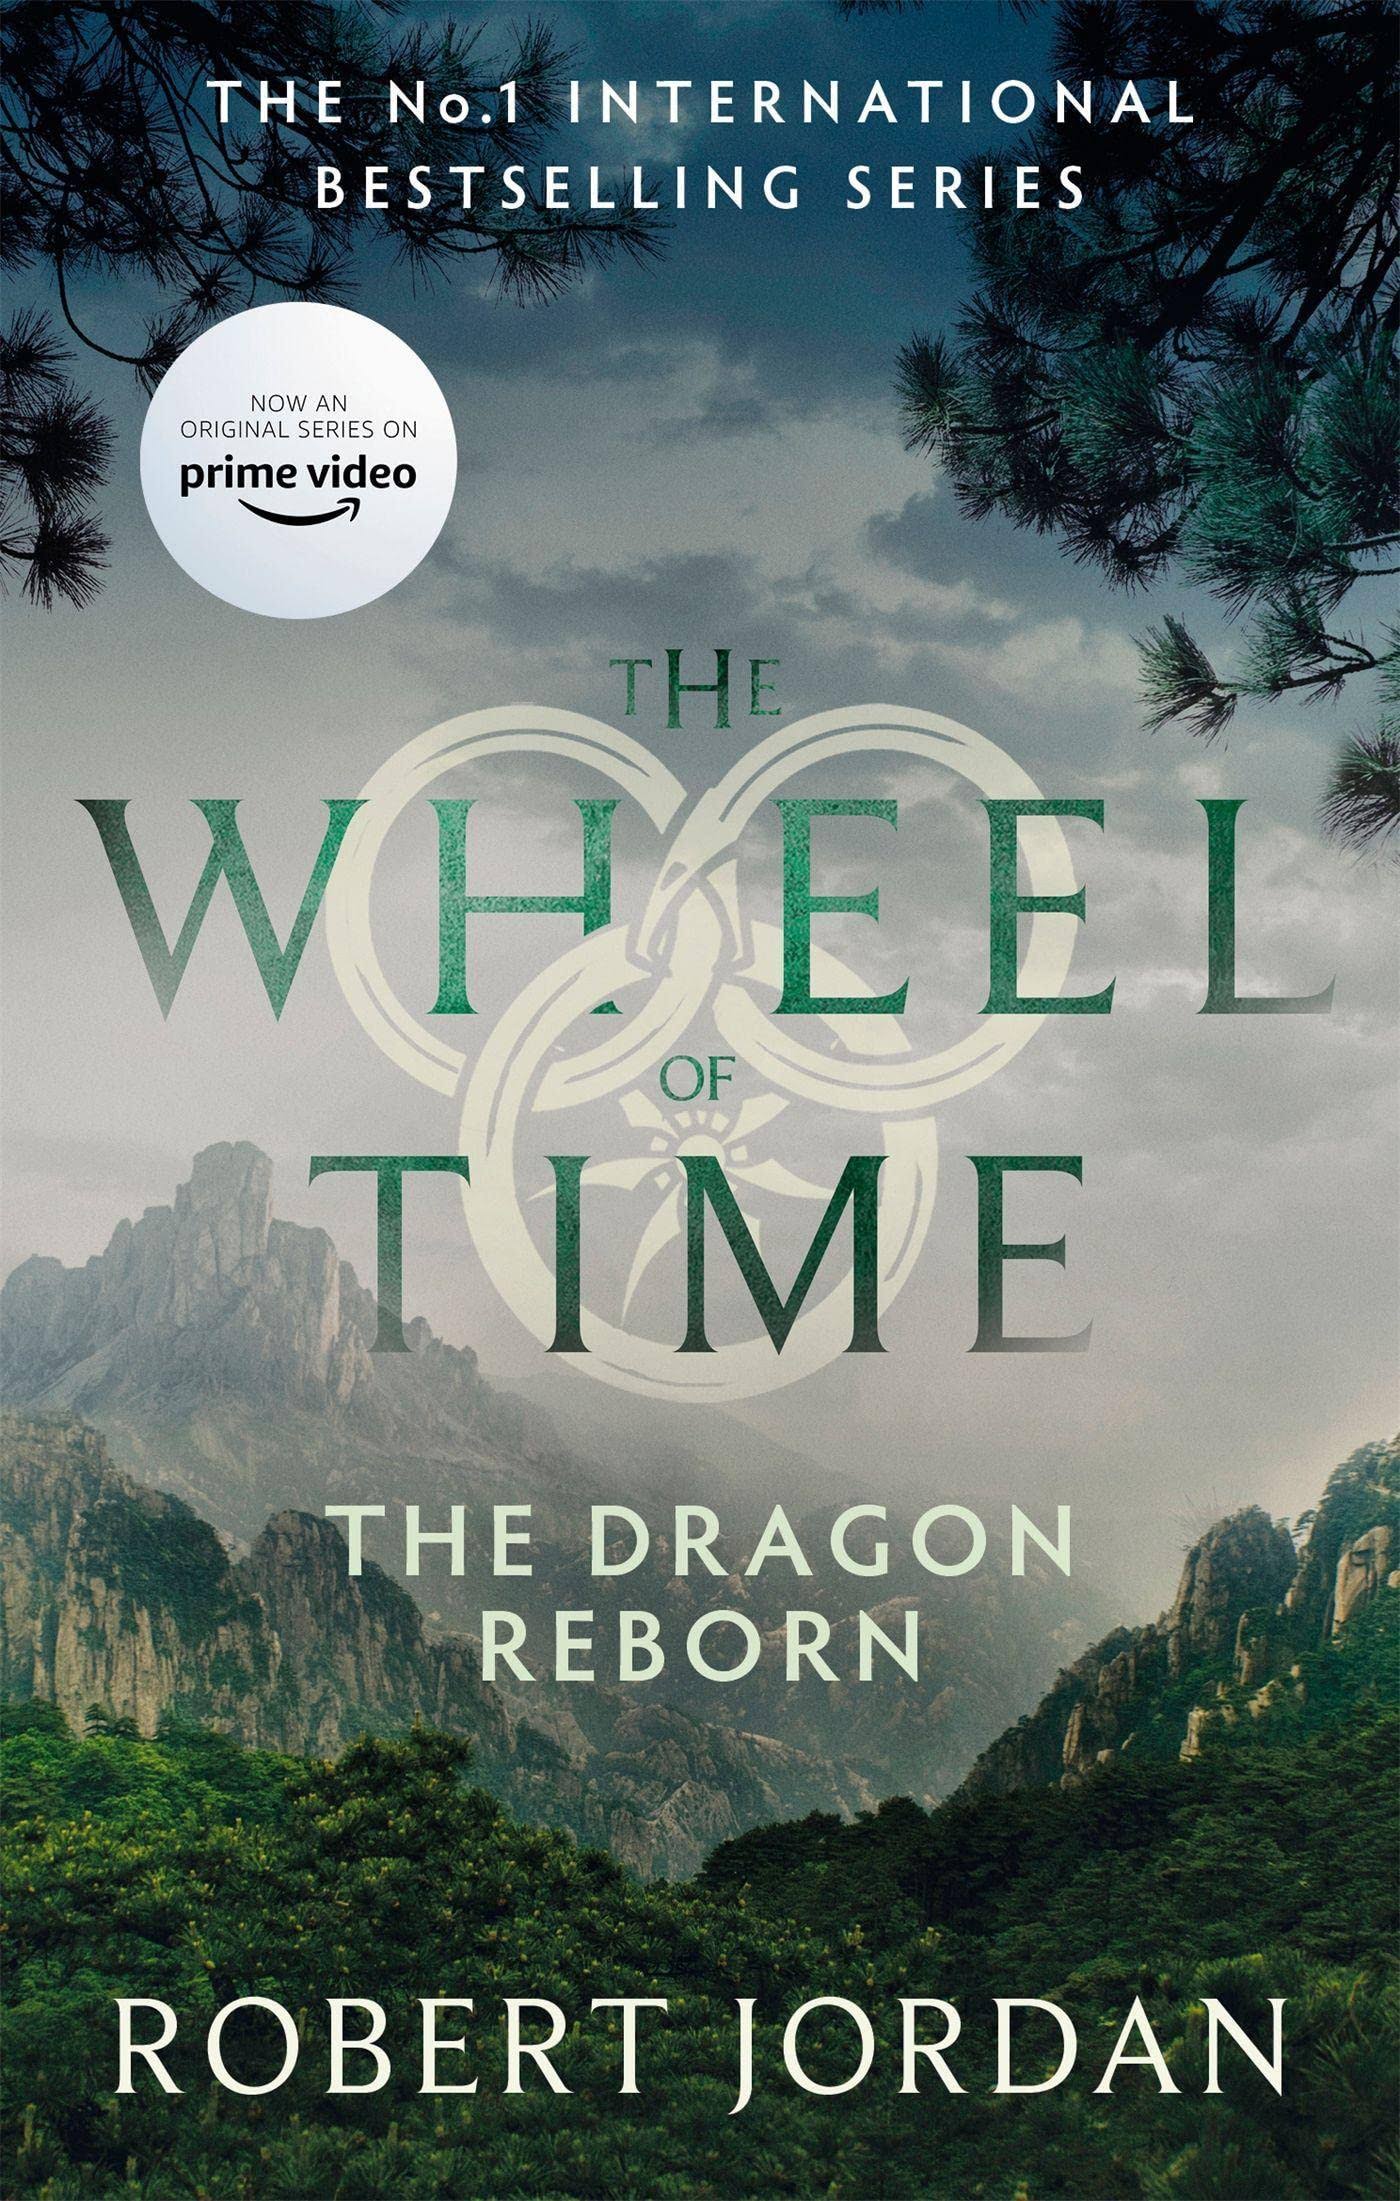 The Dragon Reborn: Book 3 of the Wheel of Time (Now a Major TV Series) [Book]